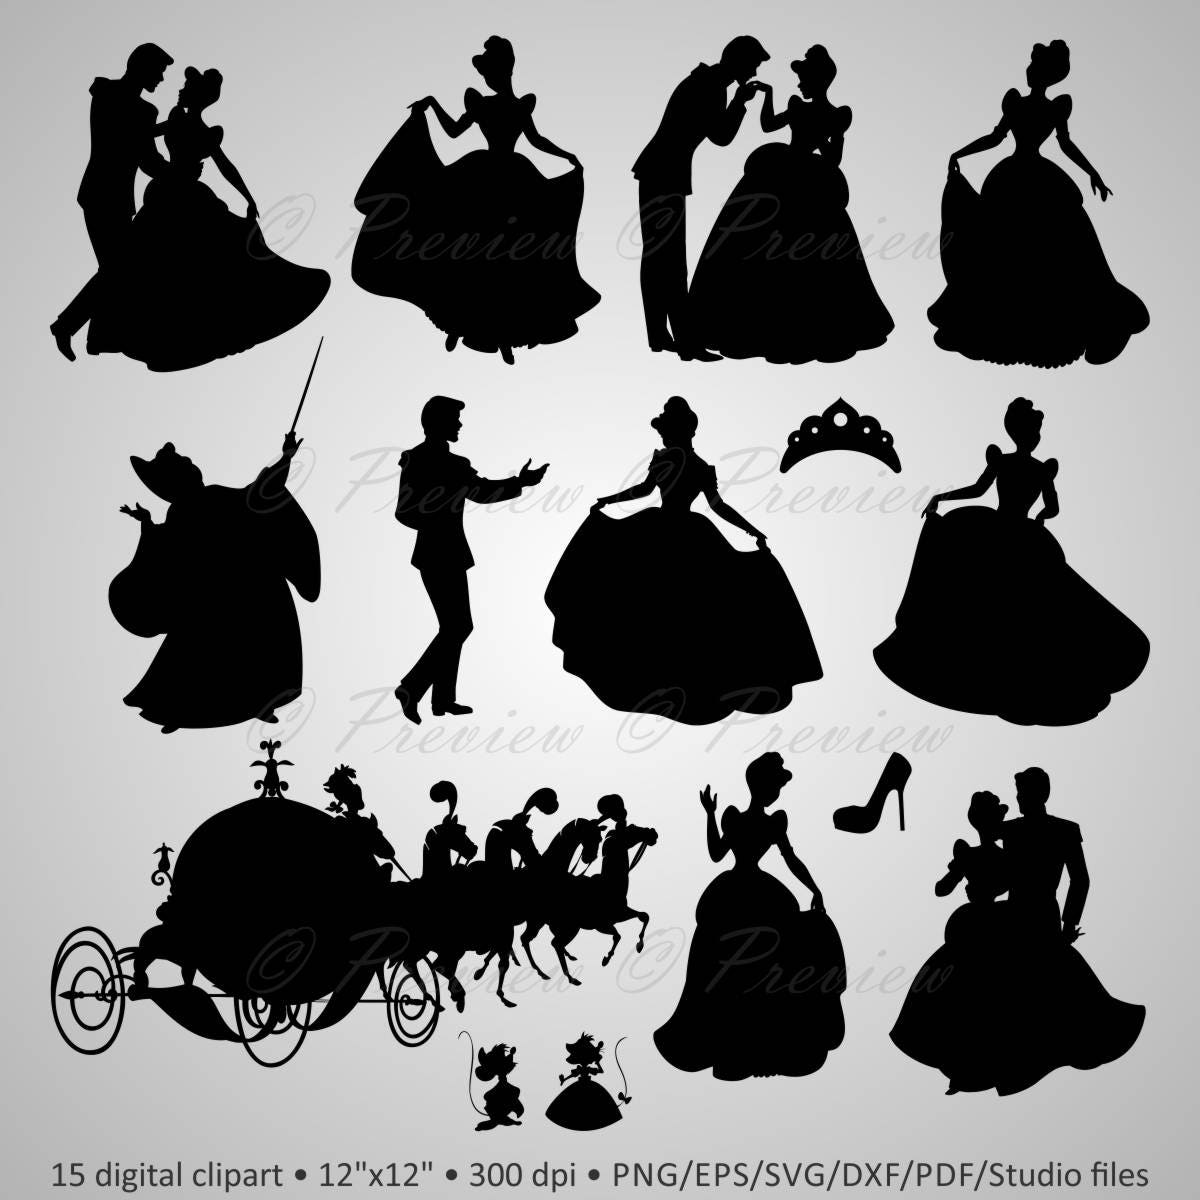 Download Buy 2 Get 1 Free! Digital Clipart Silhouettes "Cinderella ...